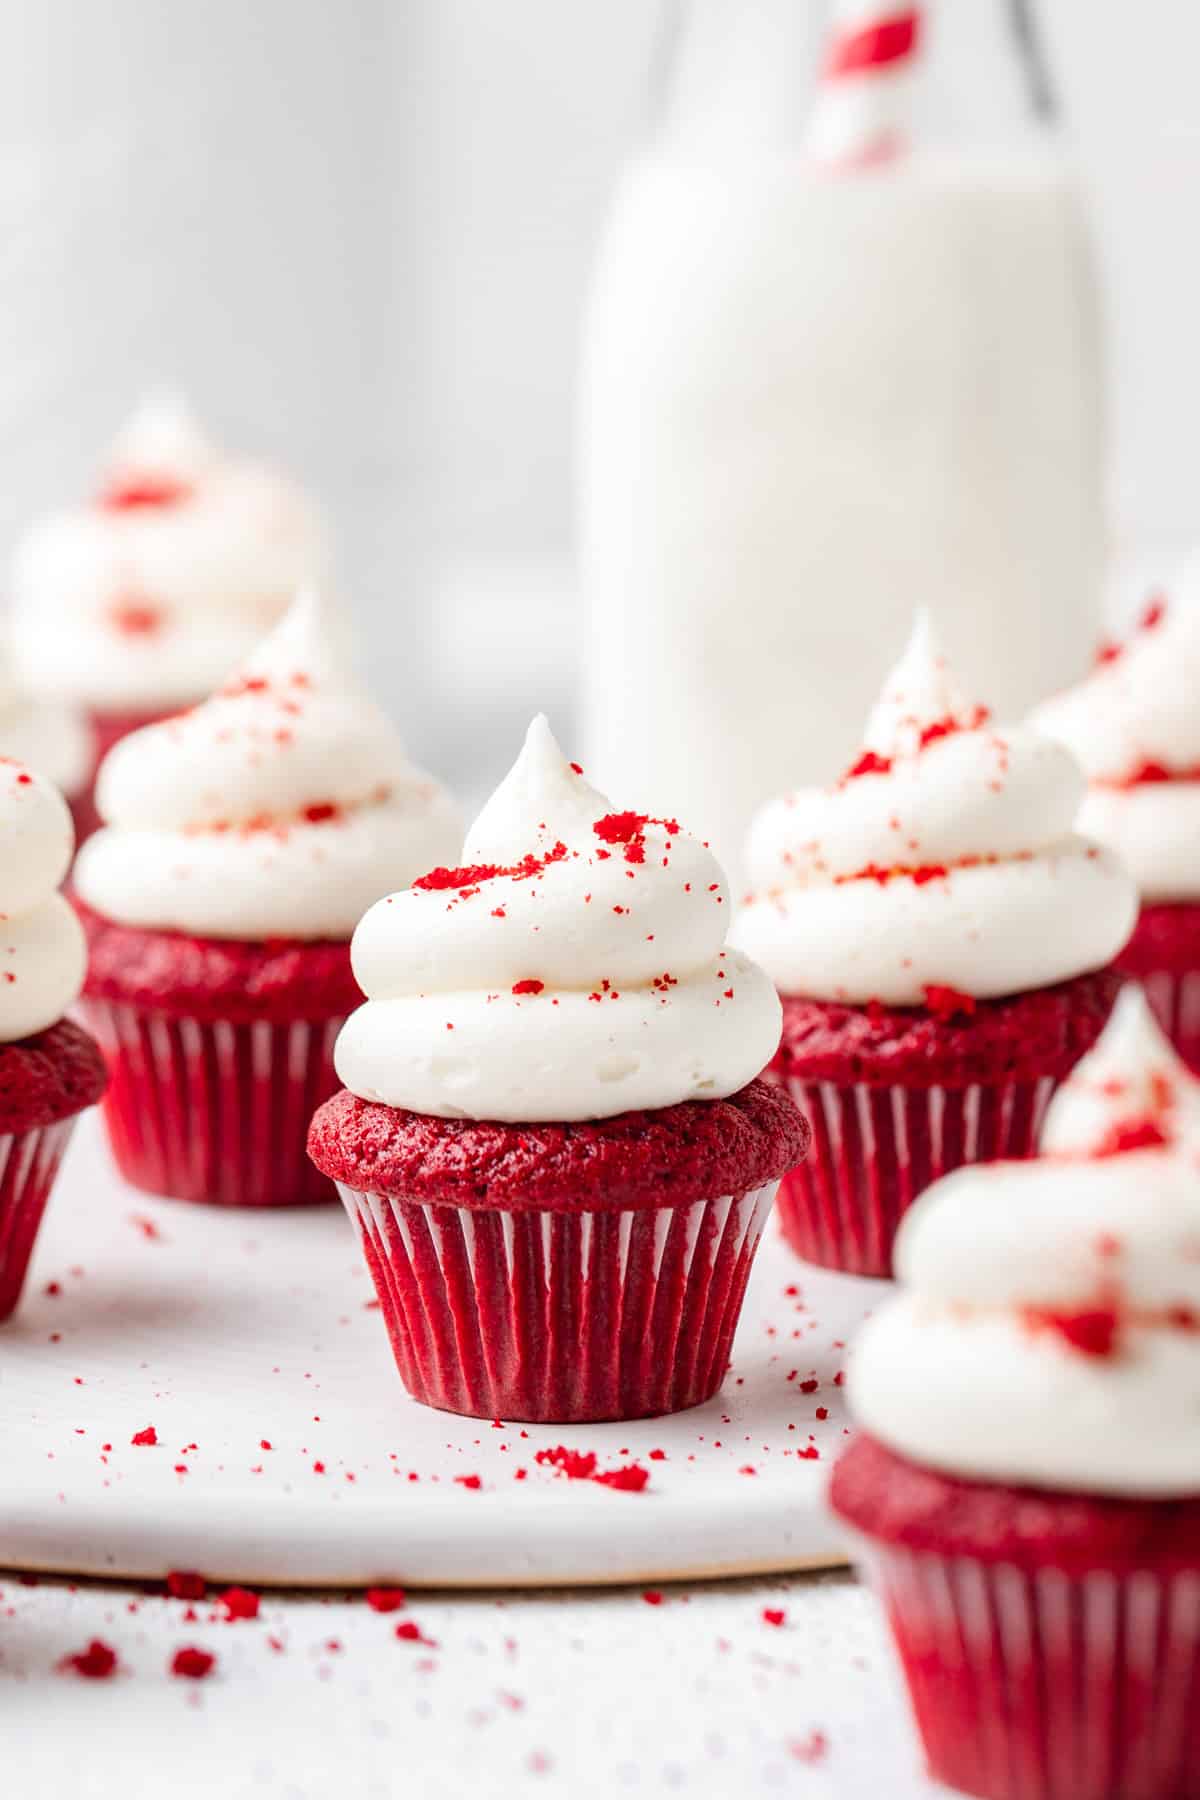 mini red velvet cupcakes with cream cheese frosting and sprinkled with cake crumbs.